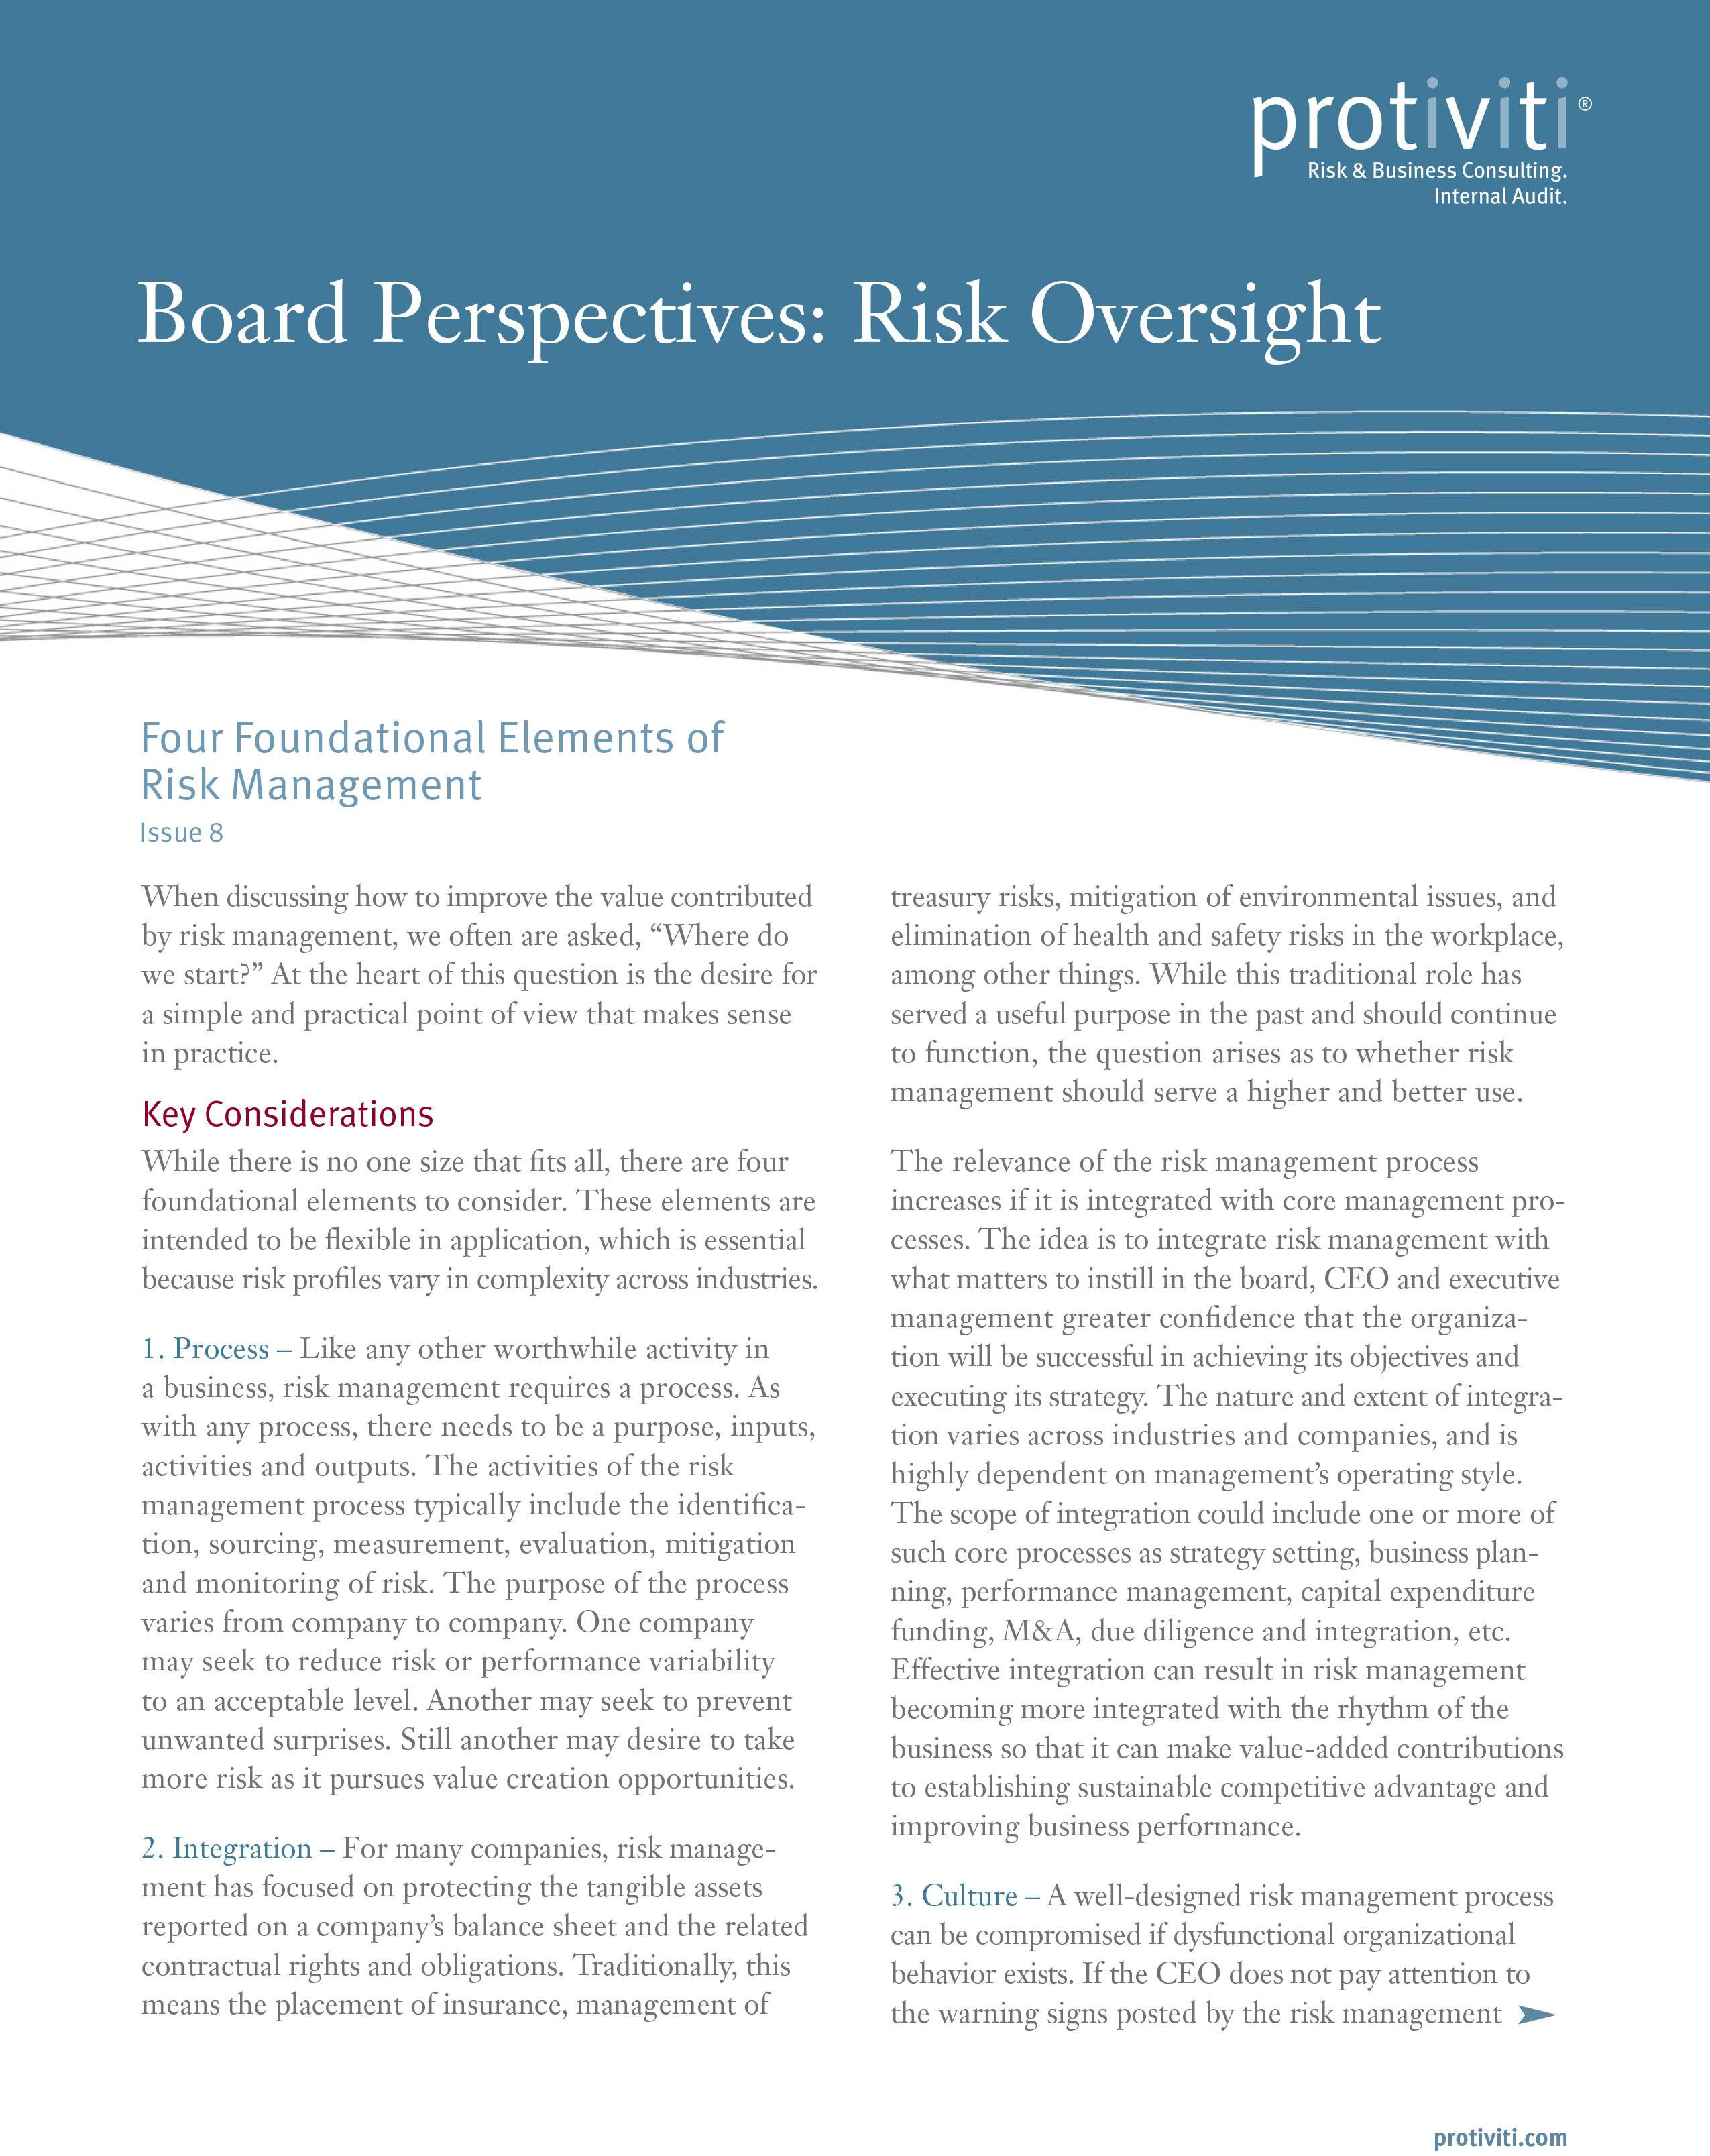 Screenshot of the first page of Four Foundational Elements of Risk Management